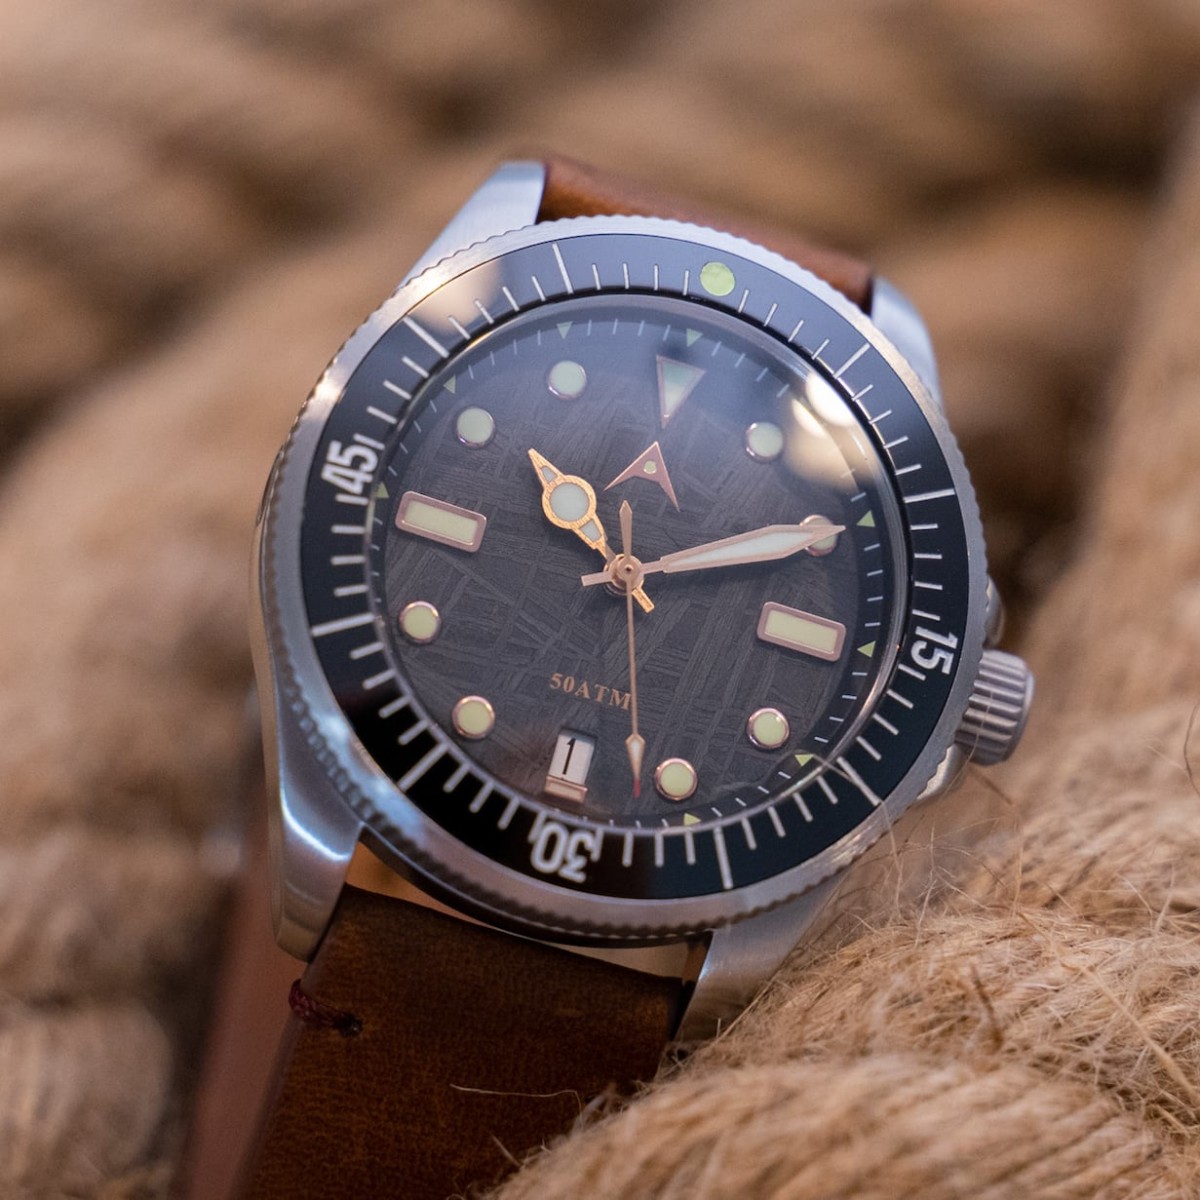 Sea Hunt 500m Retro-Inspired Dive Watch is both traditional and modern